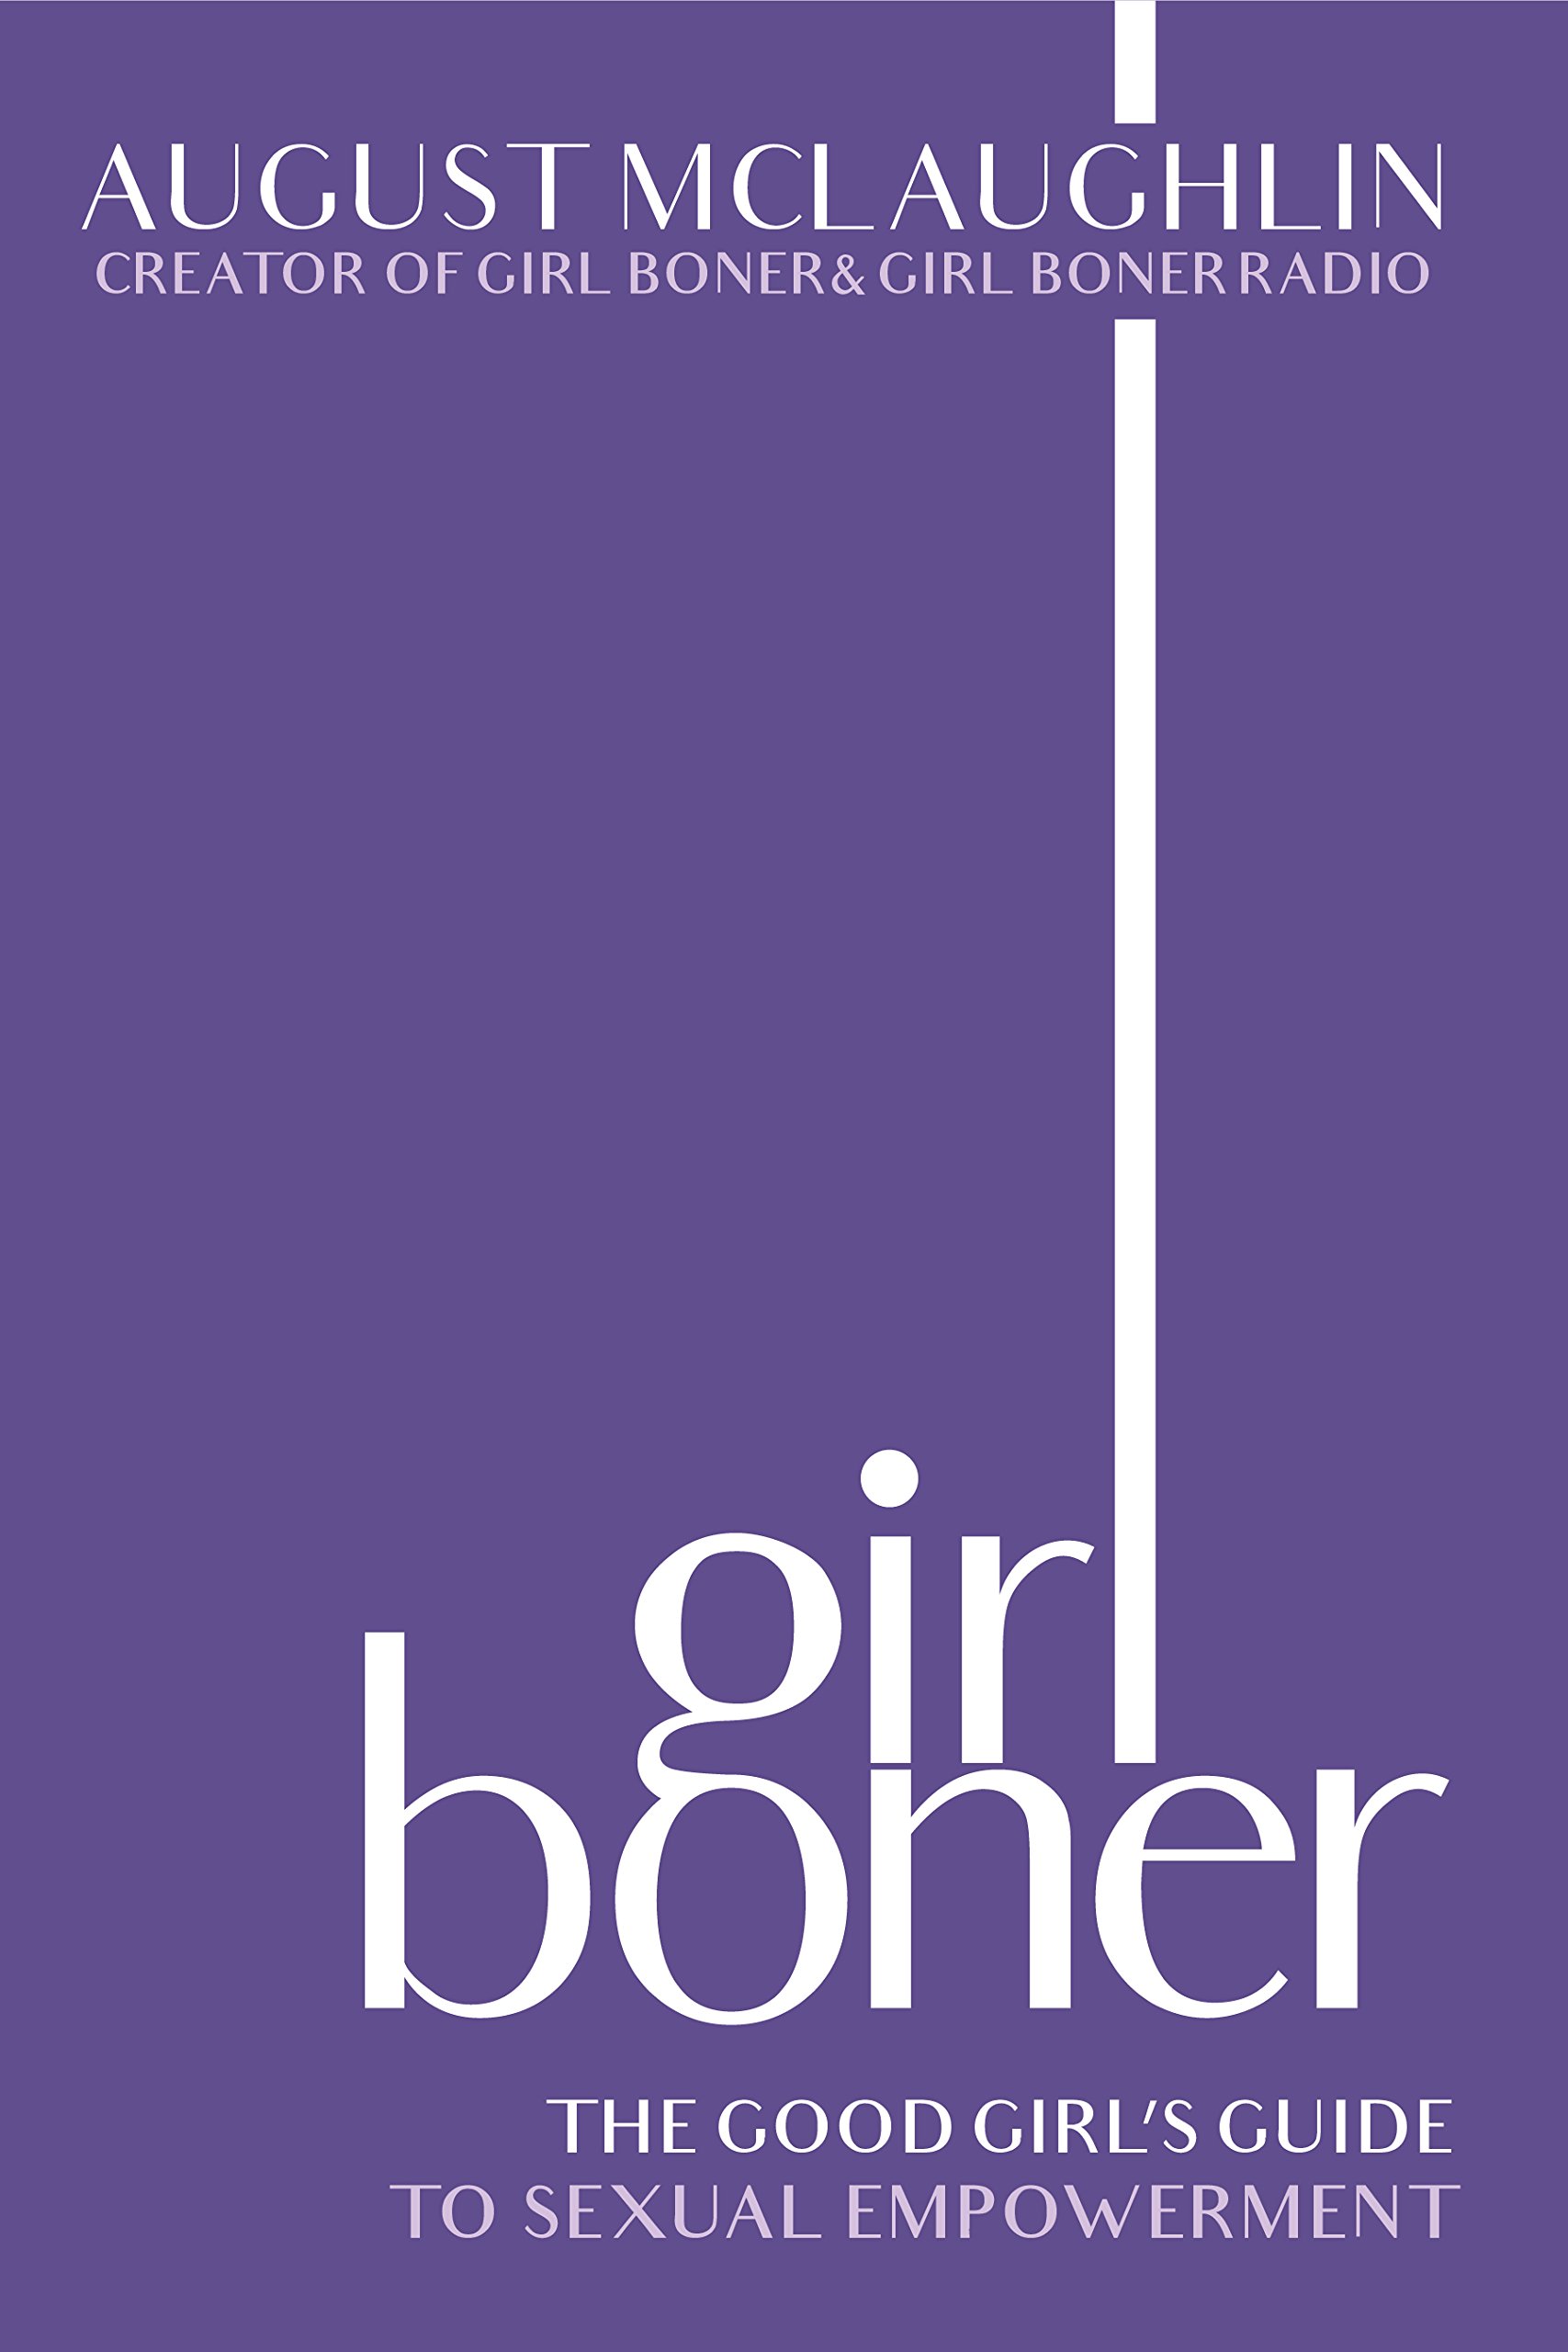 Girl Boner: The Good Girl’s Guide to Sexual Empowerment by August McLaughlin